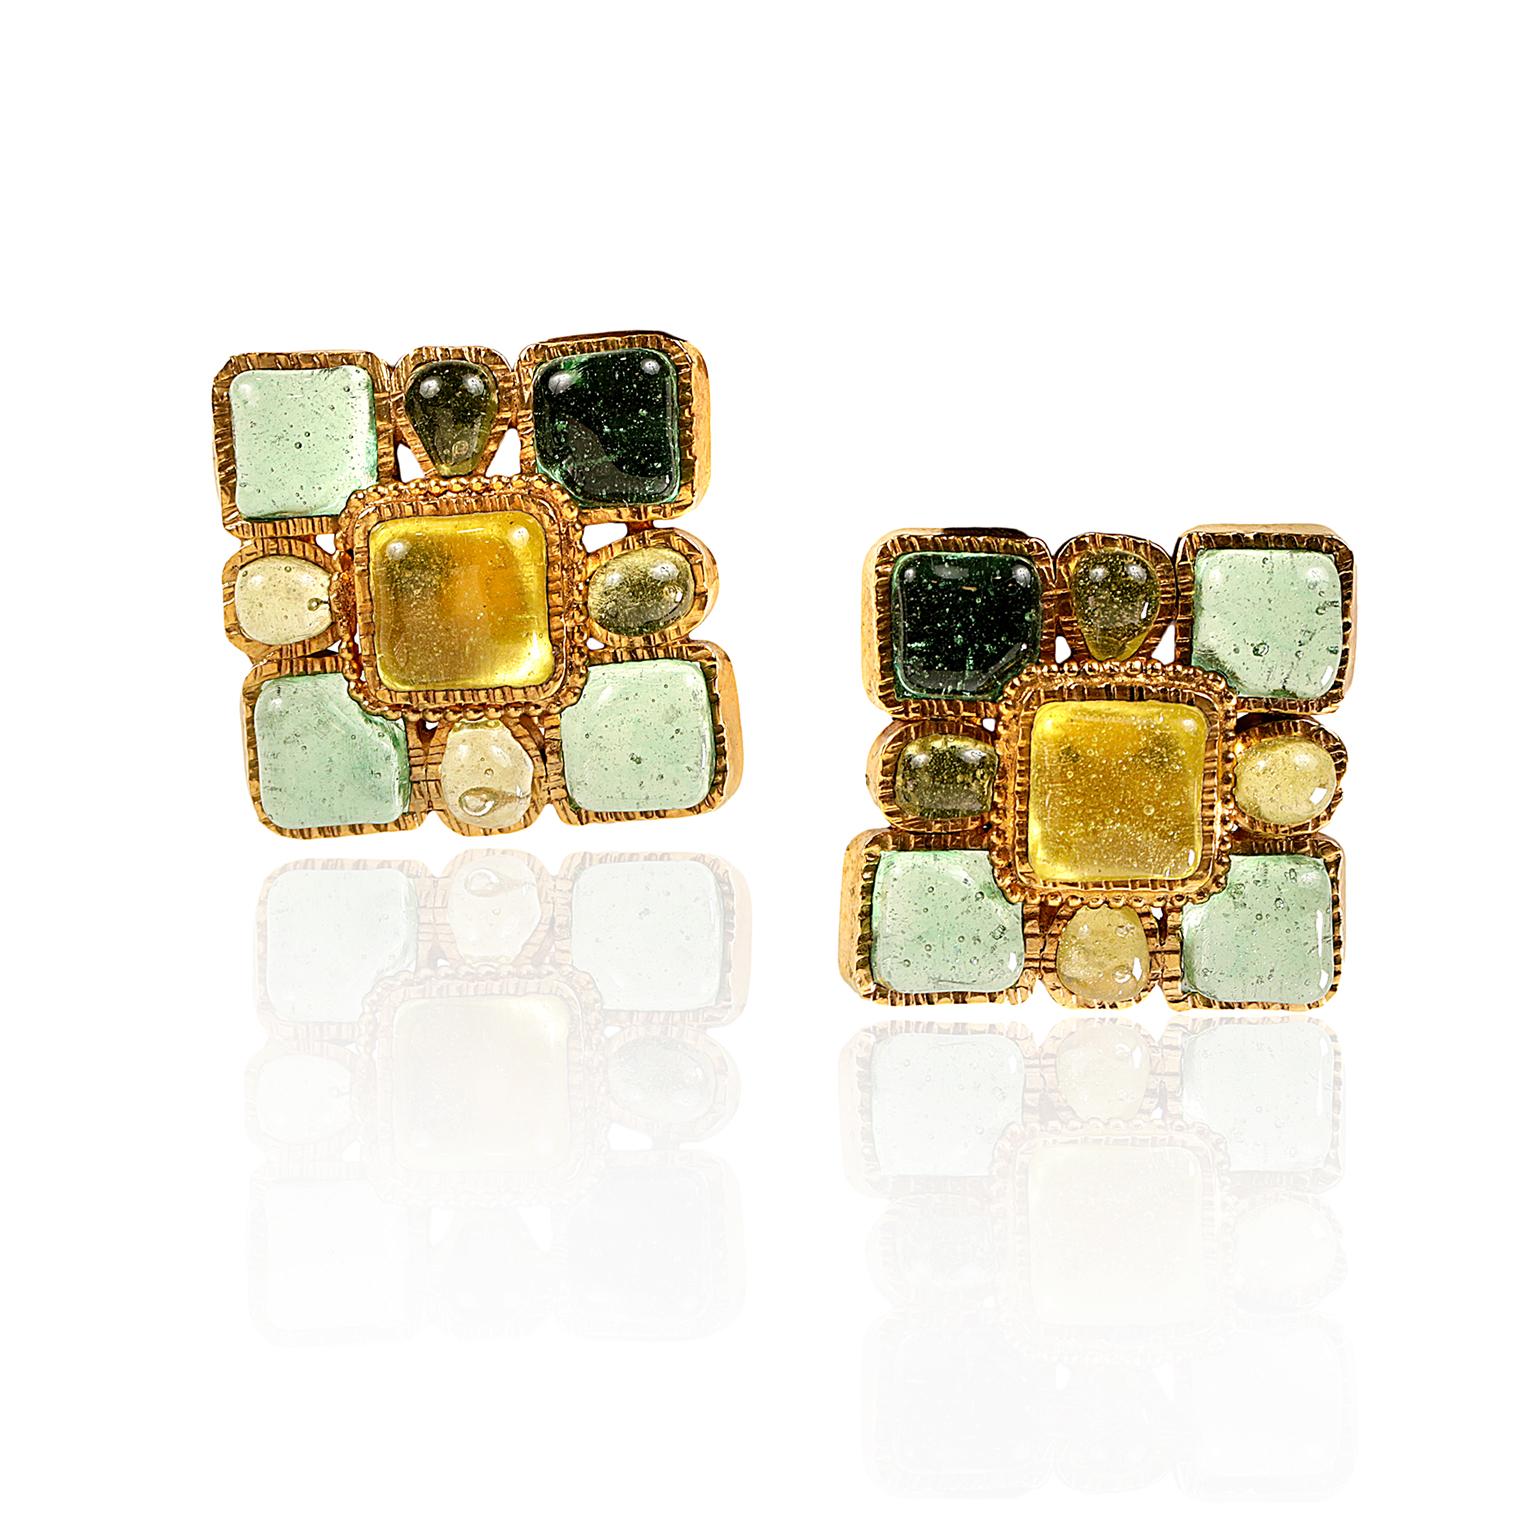 Authentic Chanel Aqua Glass Gripoix Earrings
MINT condition
Square aqua and yellow glass stone clip on earrings. Box included.    

